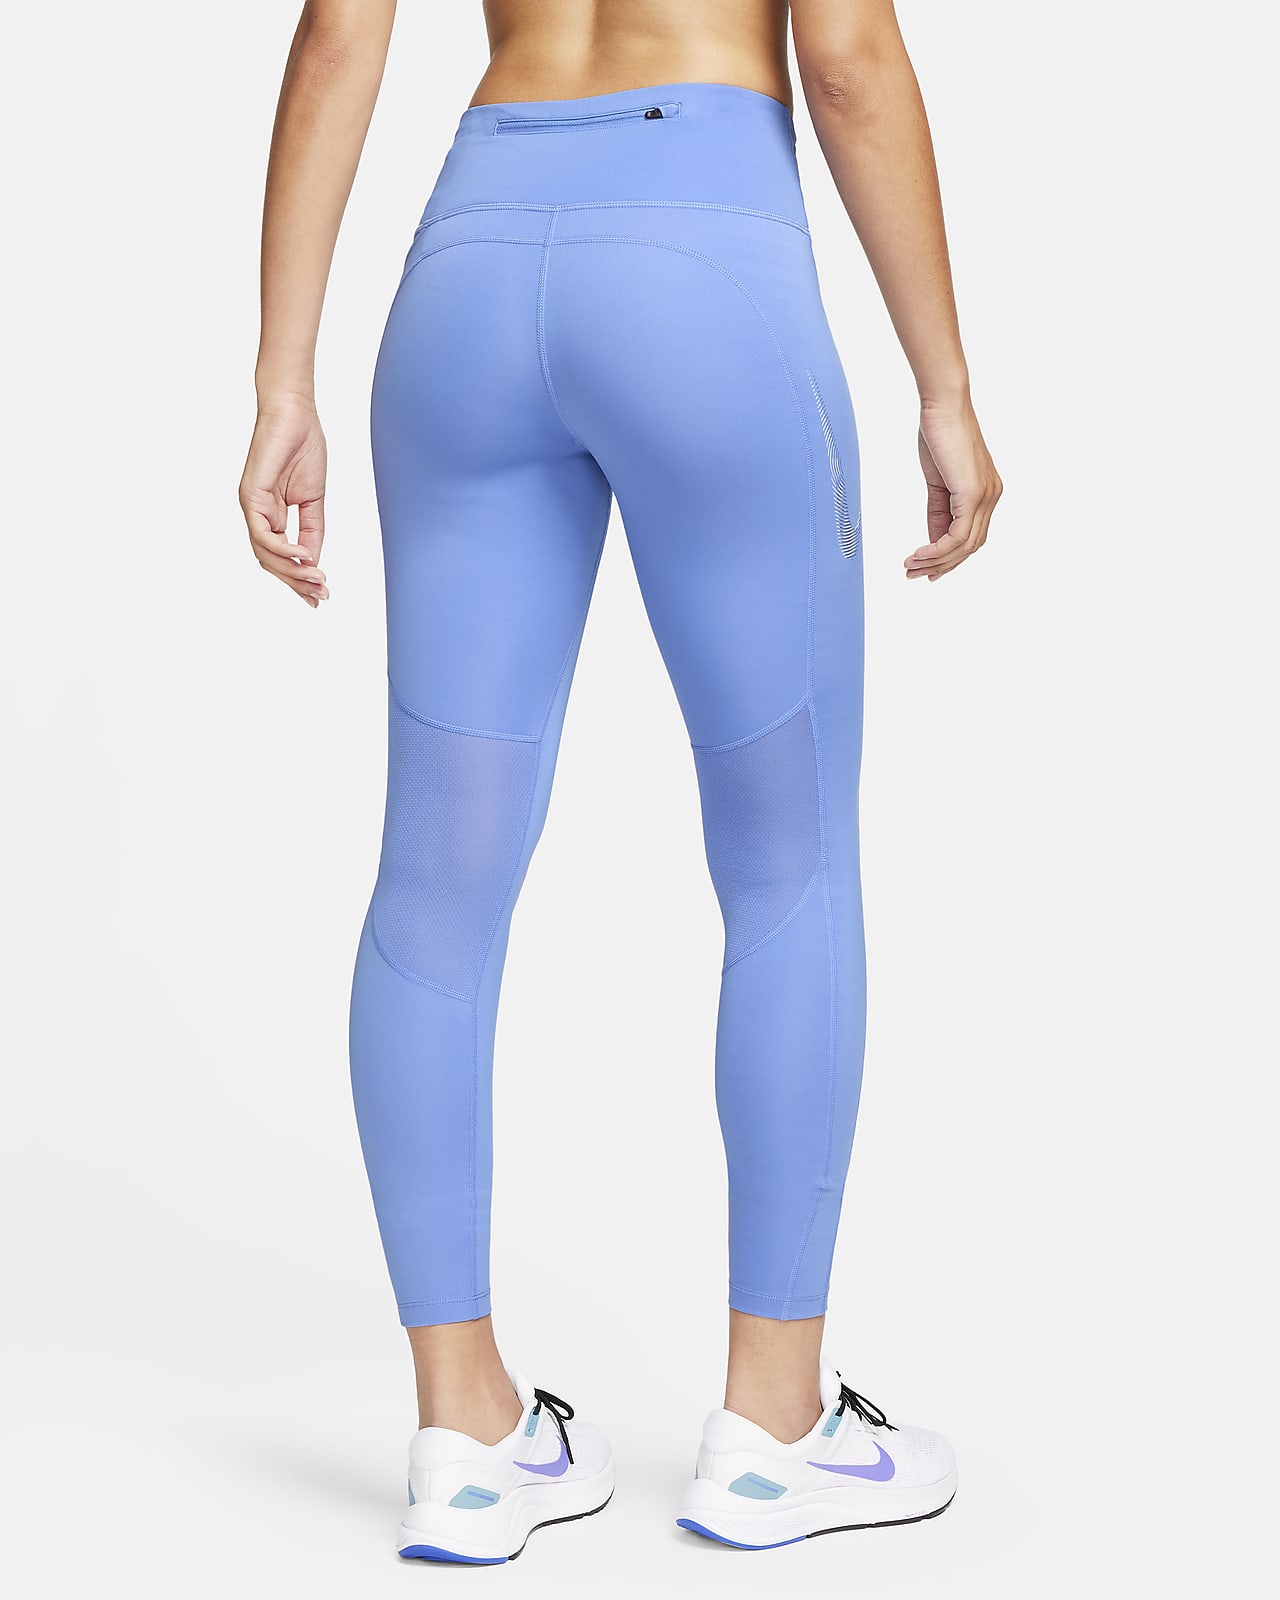 Nike Fast Women's Mid-Rise 7/8 Graphic Leggings with Pockets. Nike NL